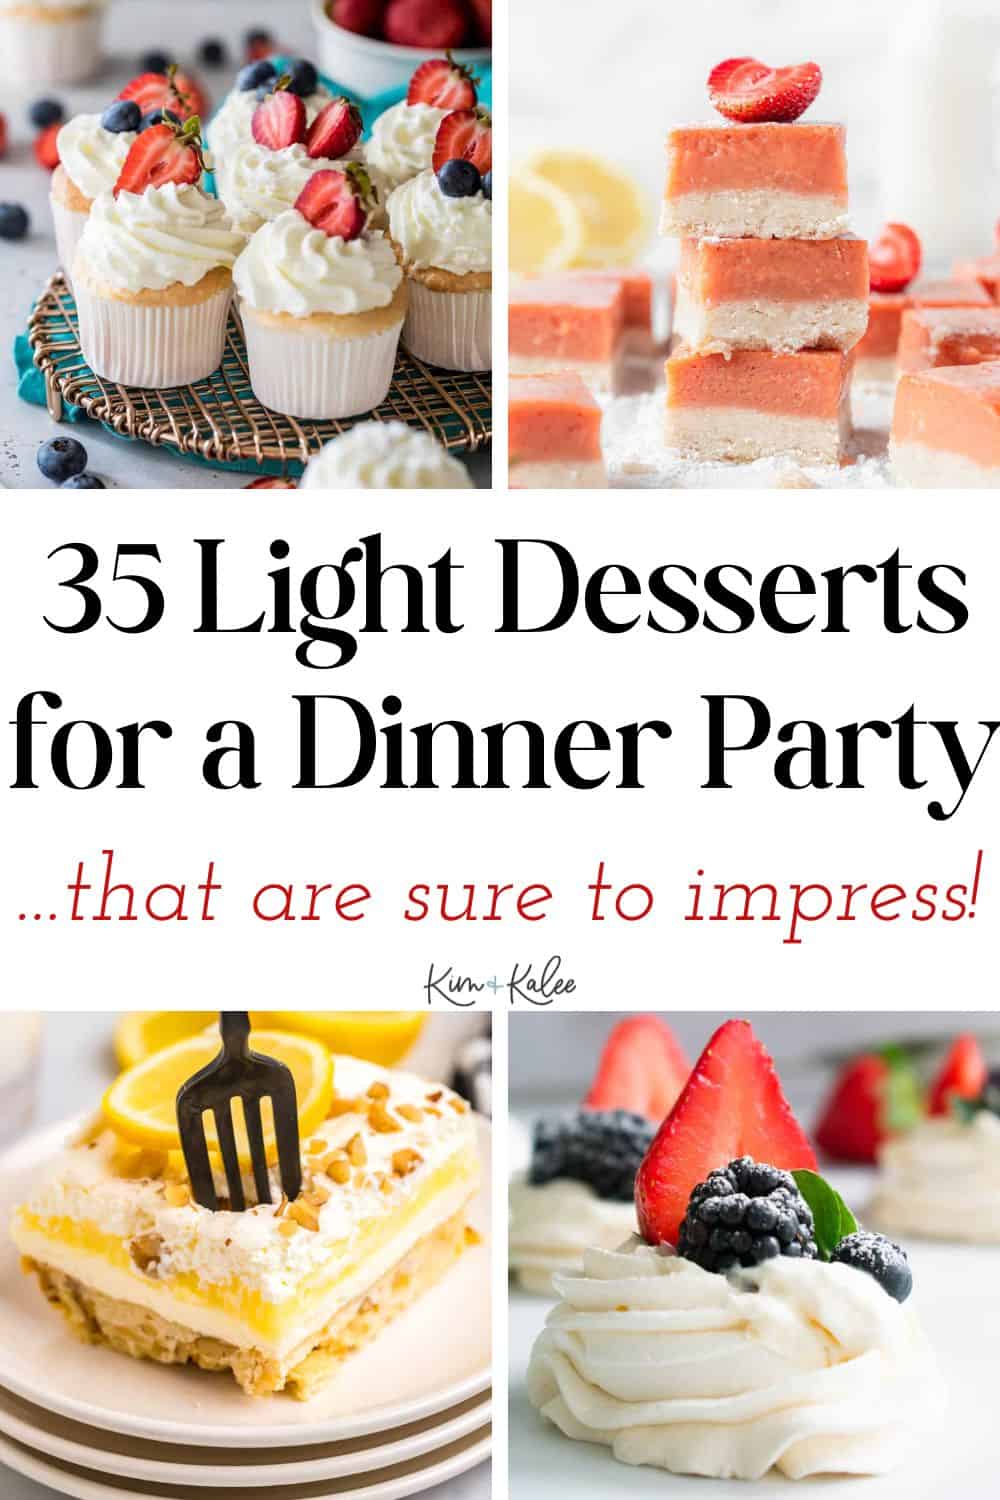 35 light desserts for a dinner party -- that are sure to impress (collage of 4 recipes)